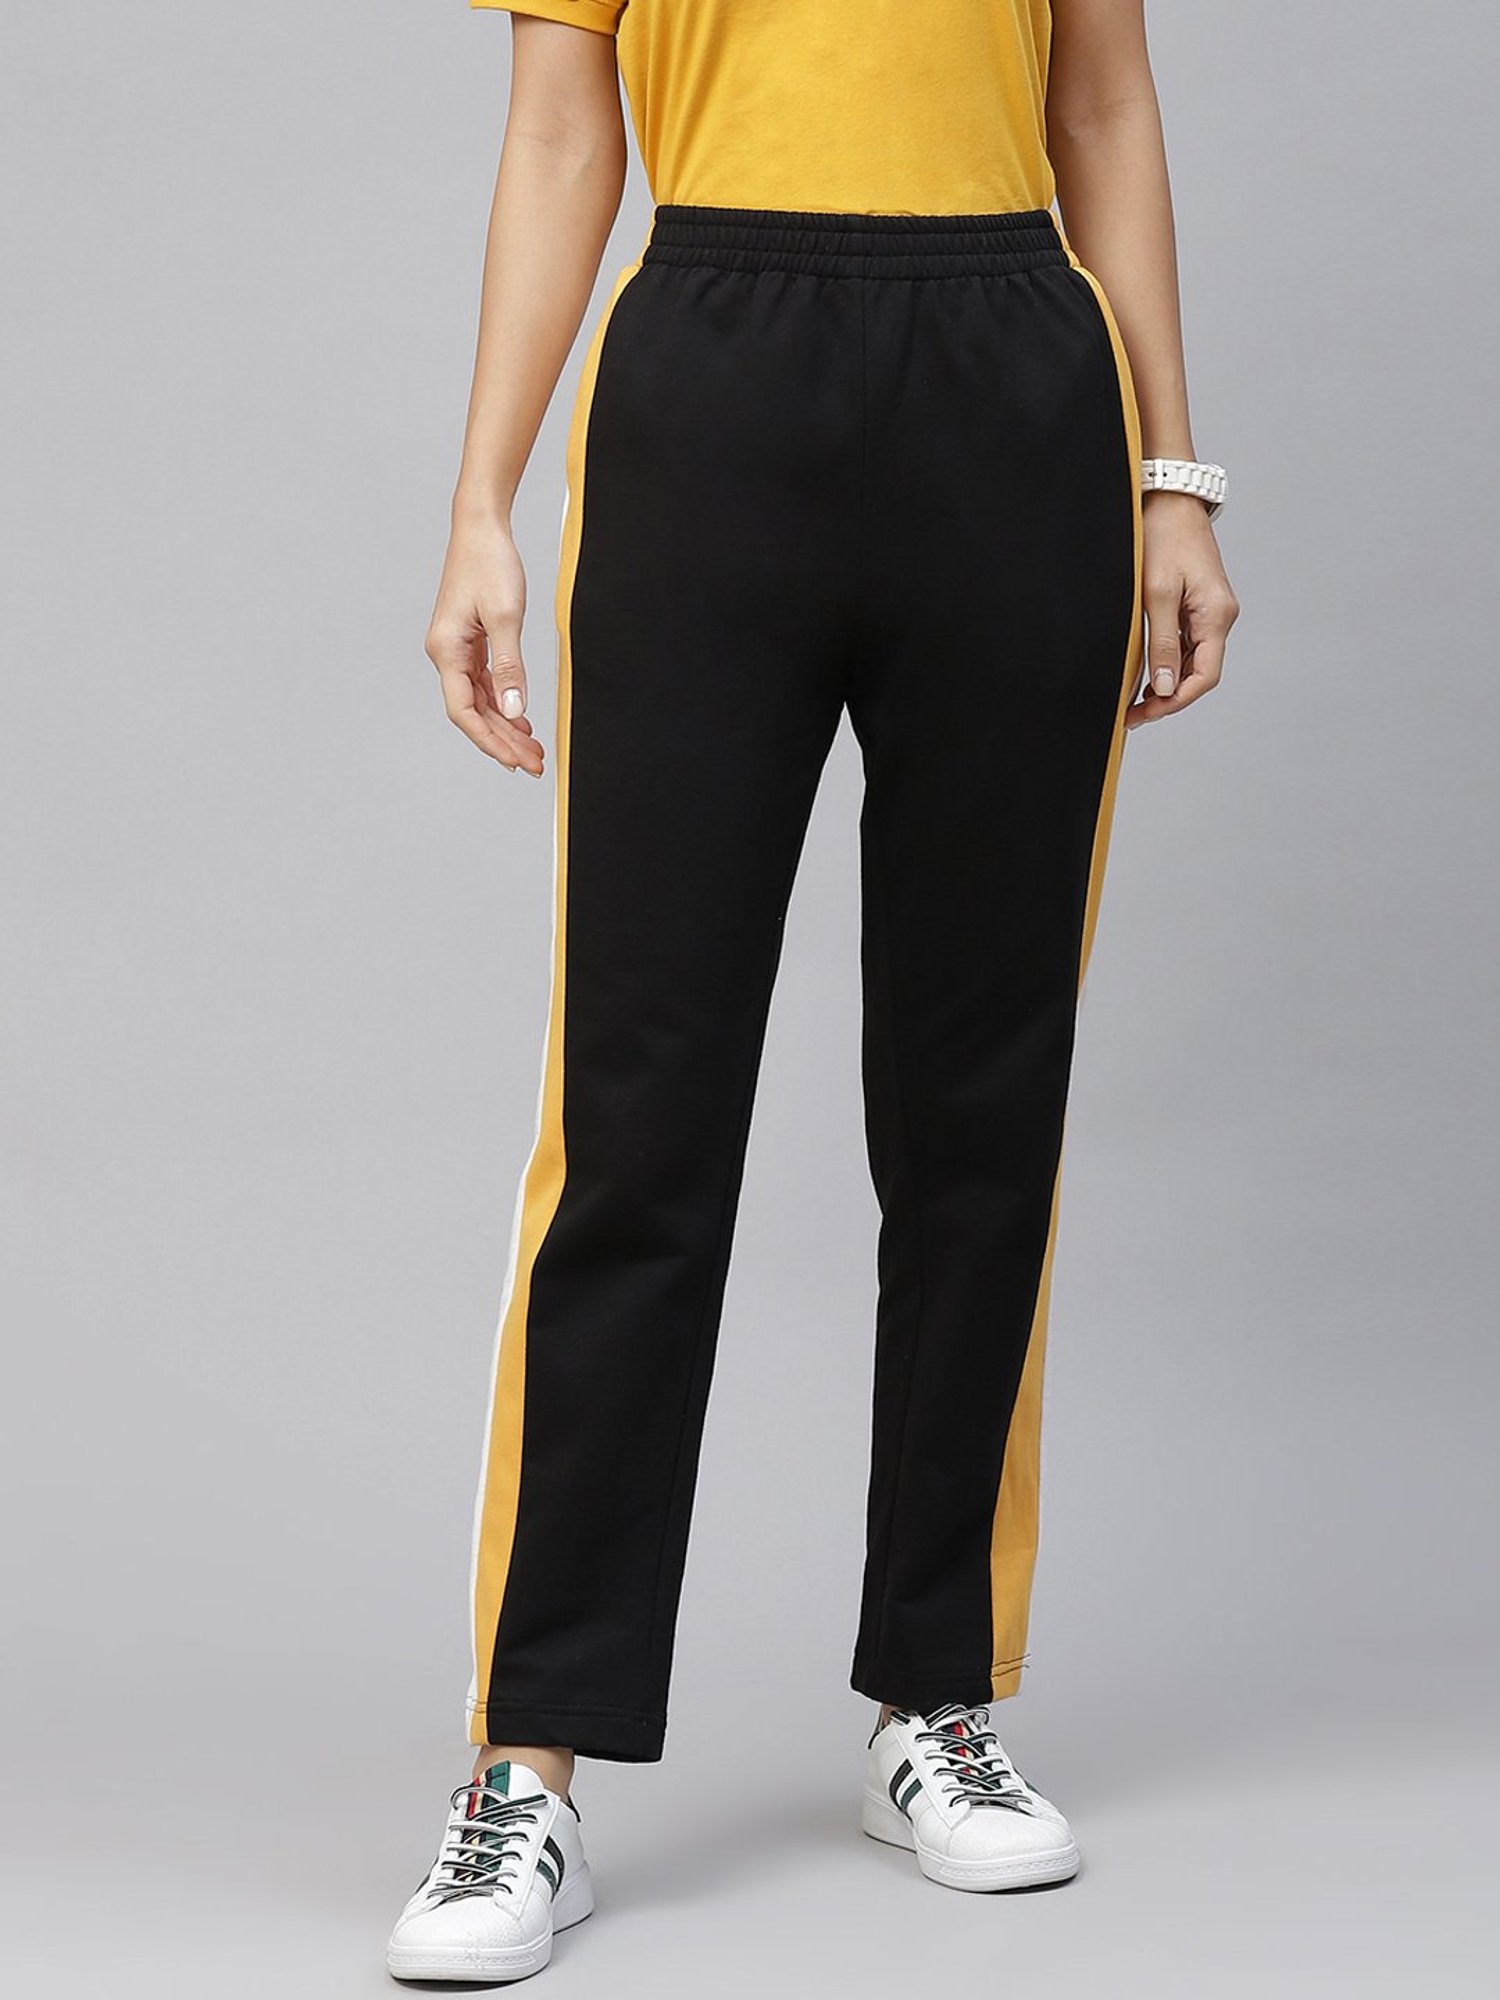 Trackpants Buy Men Black Polyester Trackpants at Cliths